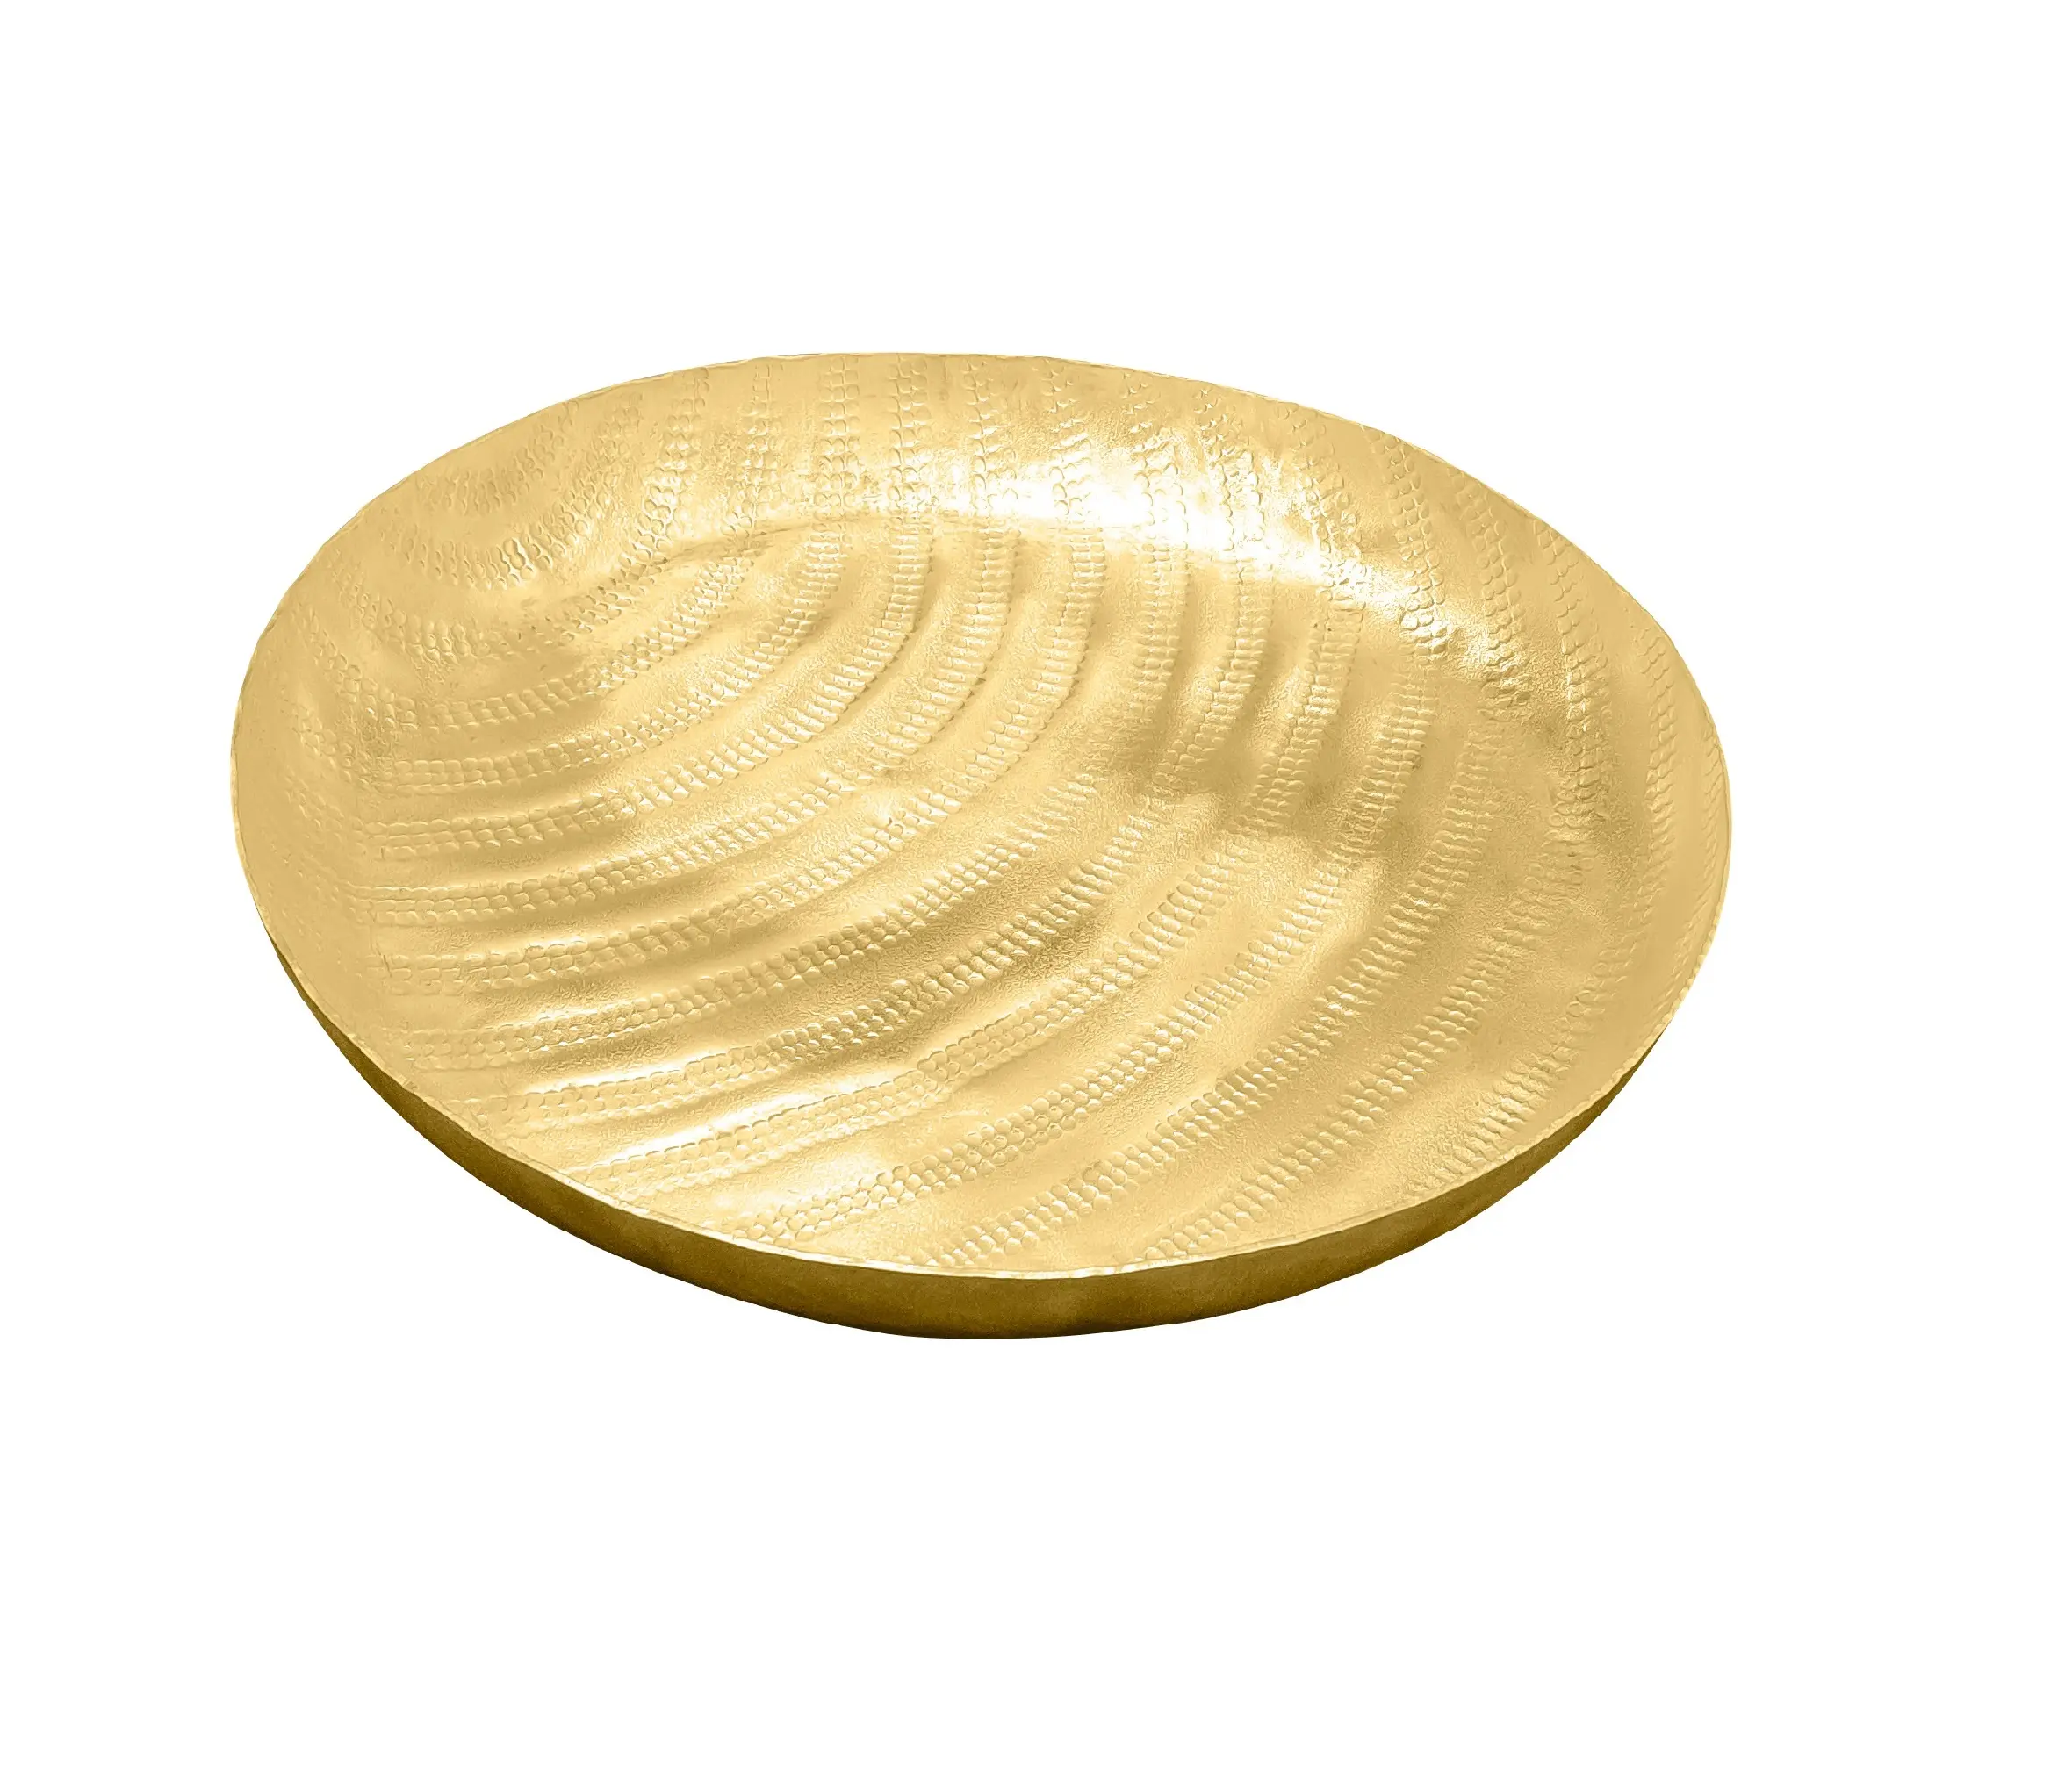 Big Brass hammered serving plate dinnerware metal dishes and plates customized modern platters and serving trays